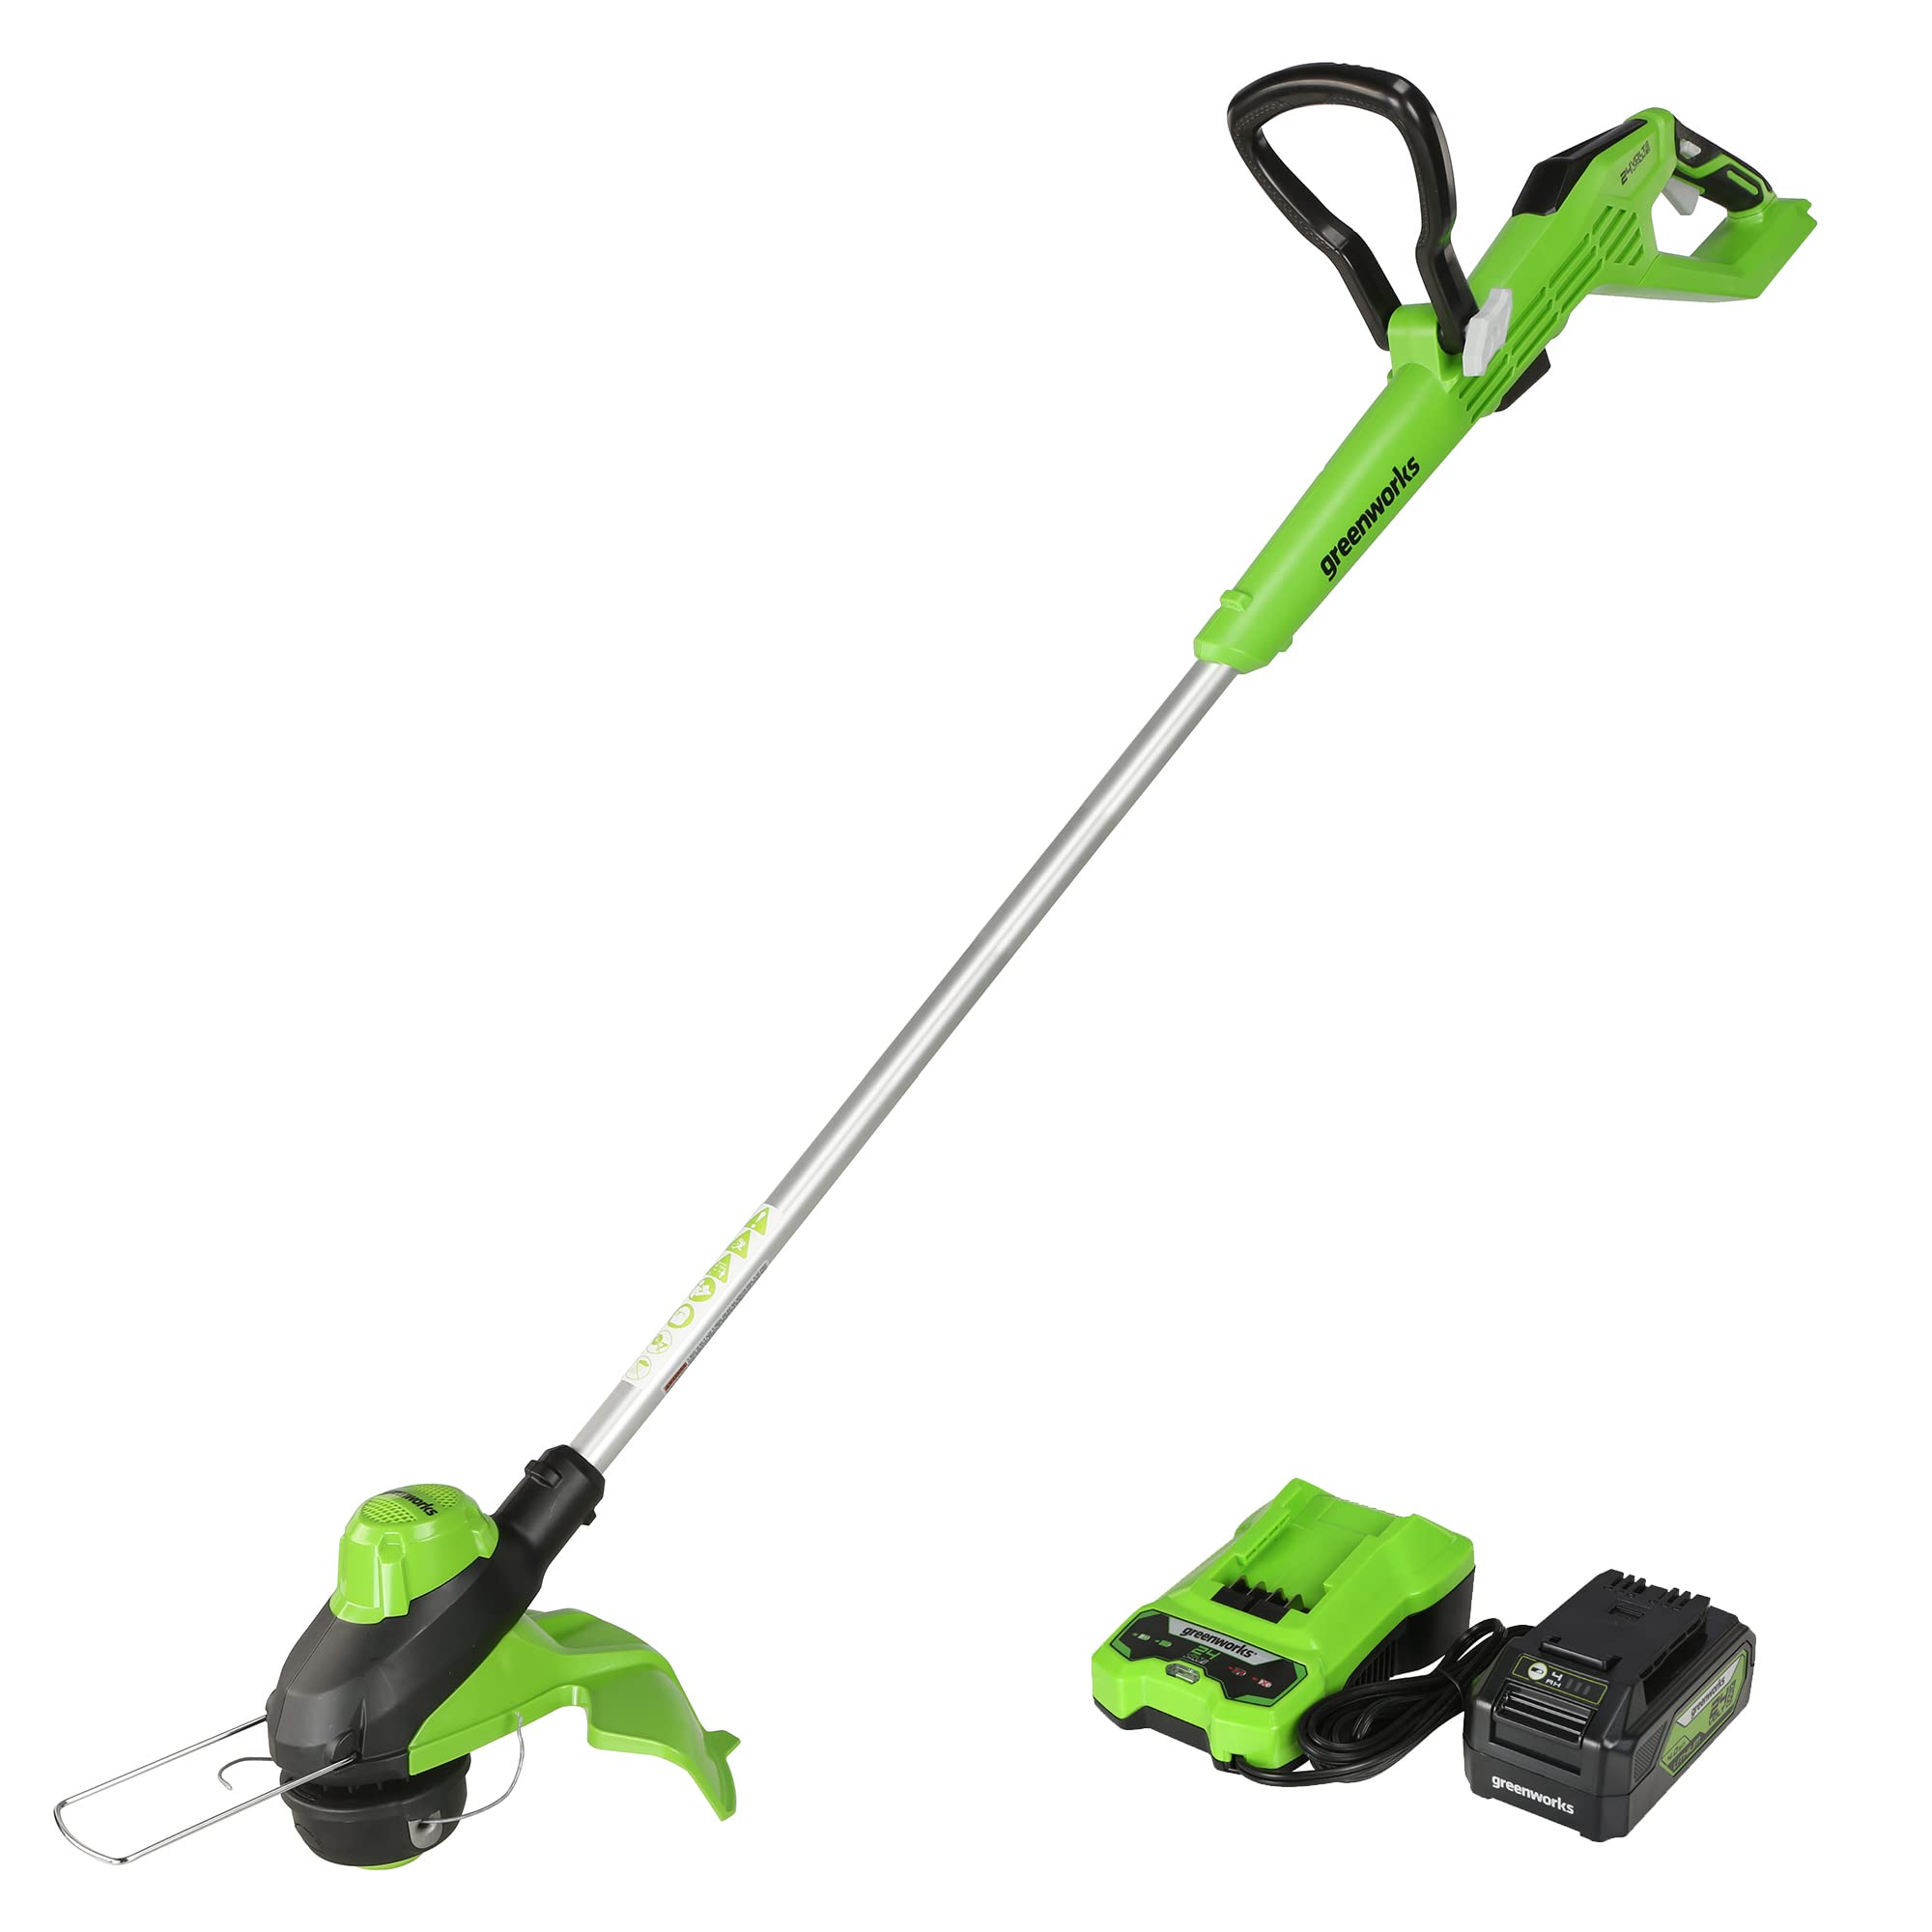 Greenworks 24V 13 Brushless Cordless String Trimmer, 40Ah Usb Battery And Charger Included